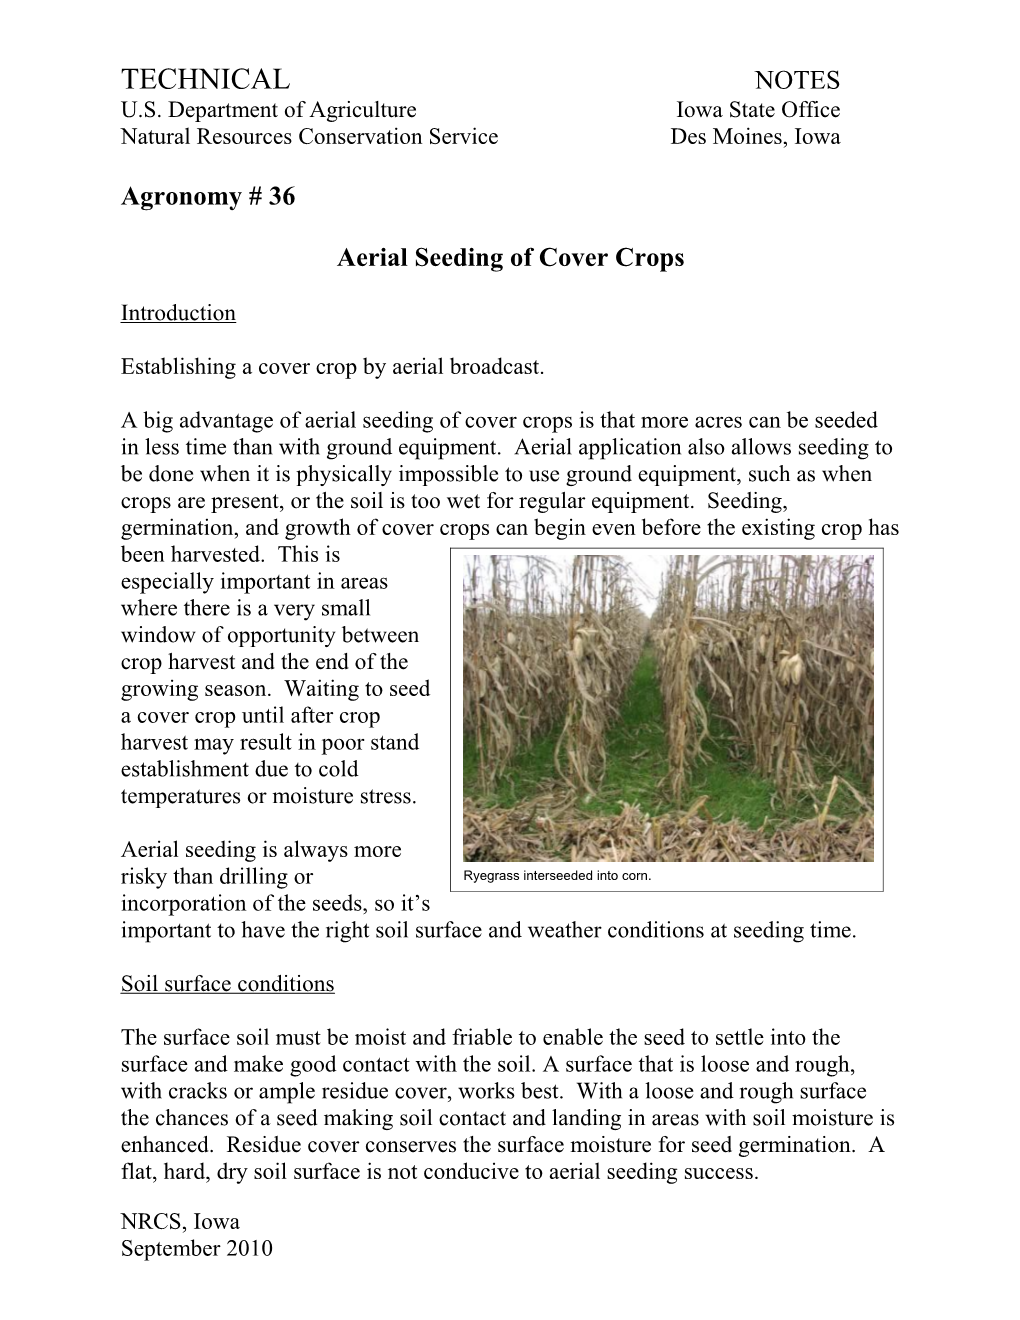 Aerial Seeding of Cover Crops